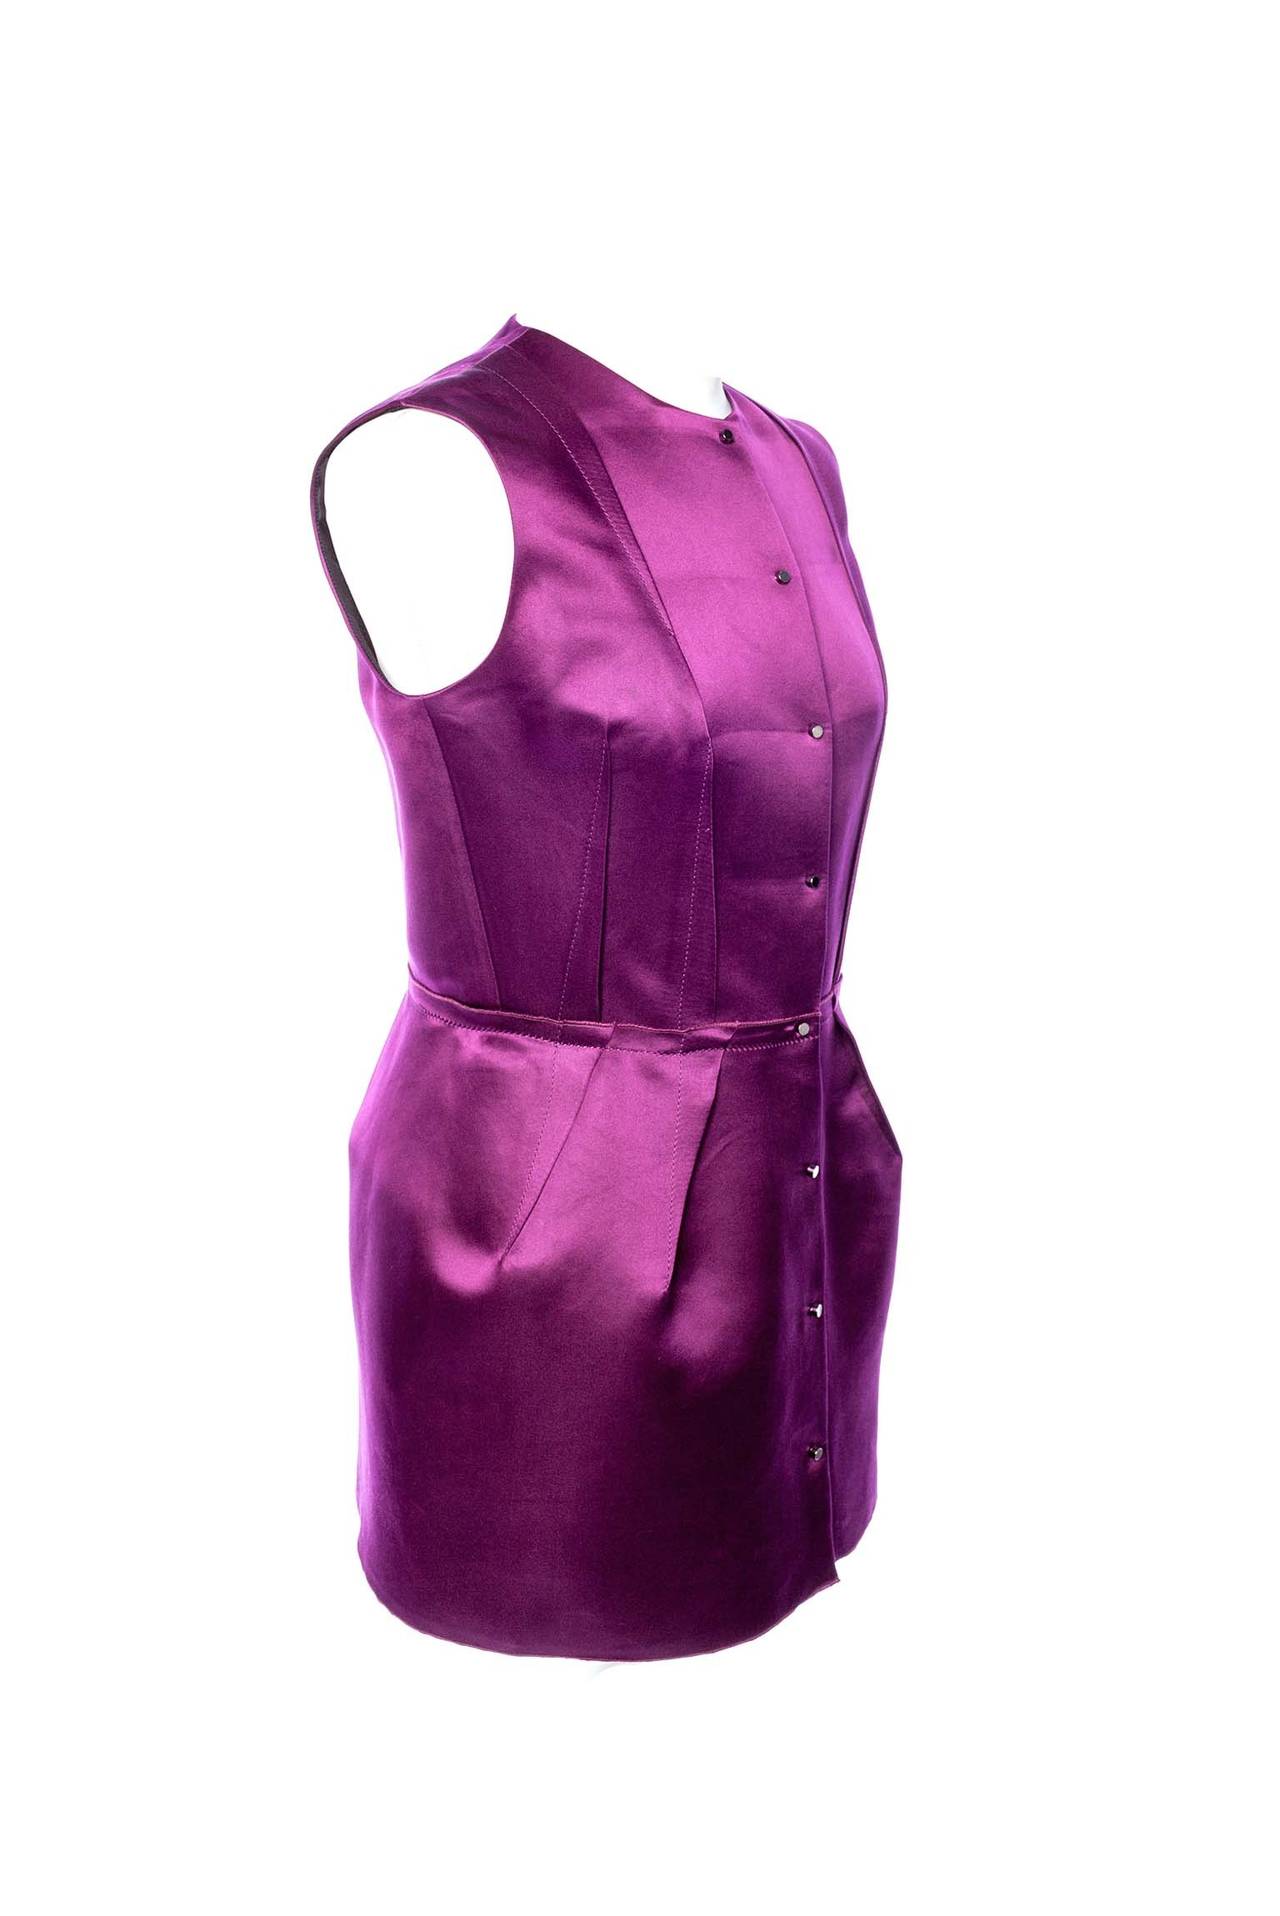 Lanvin deep purple winter 2007 sleeveless dress. This item can function as either a micro dress or longer top, 8 unusual snaps, exposed seam work, fully lined. This item has the feel of a couture shape, standing away from body. A great piece from